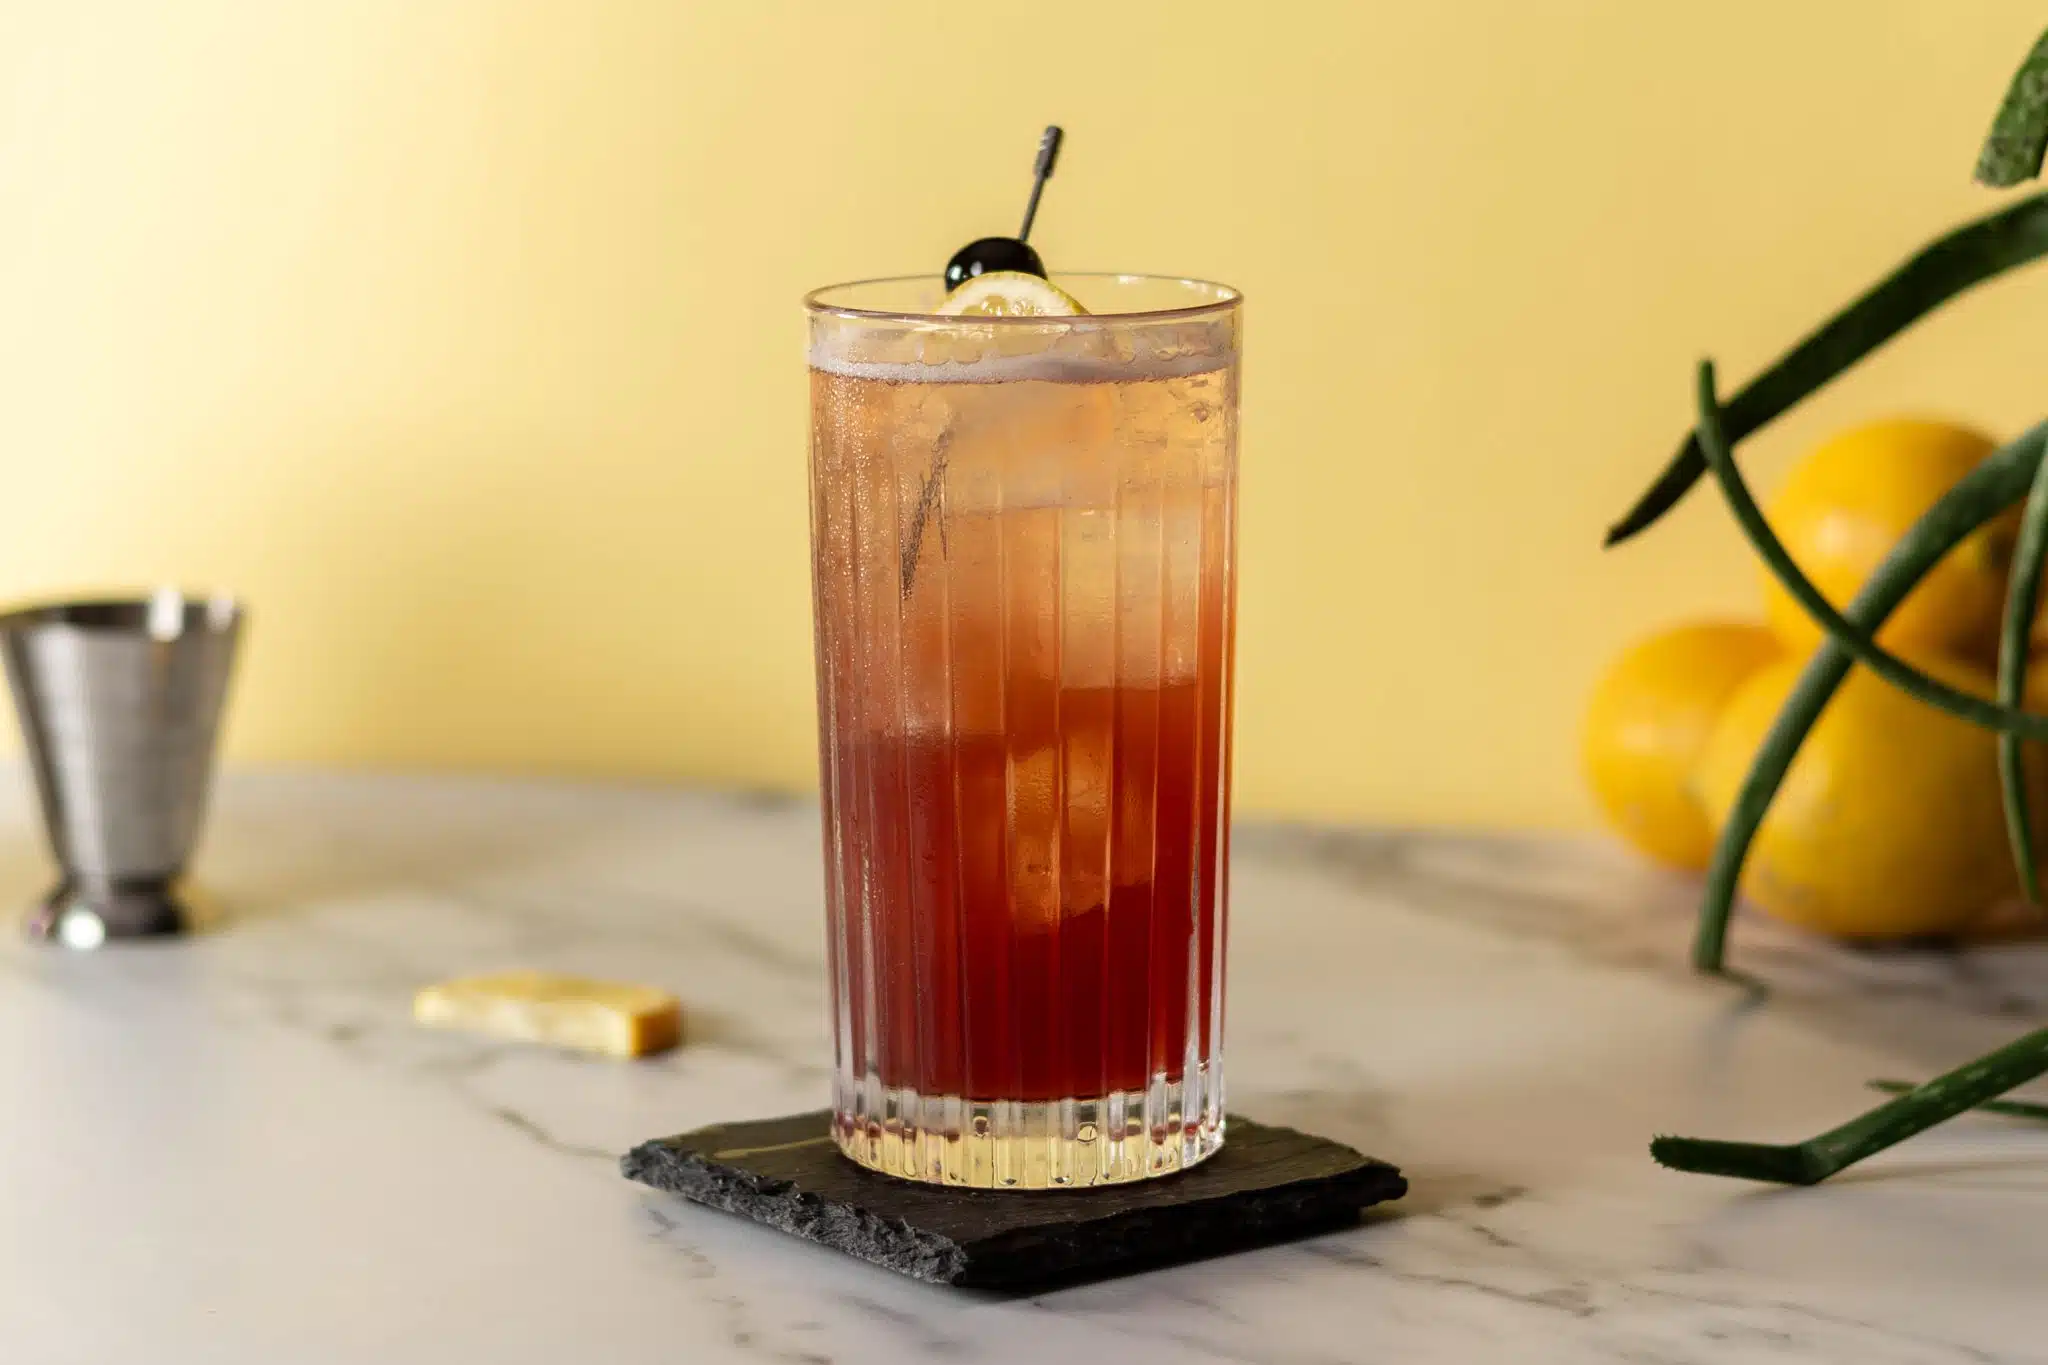 A side shot of a Sloe Gin Fizz cocktail on a black stone plate placed on a white marmol surface with a jigger and oranges on the background